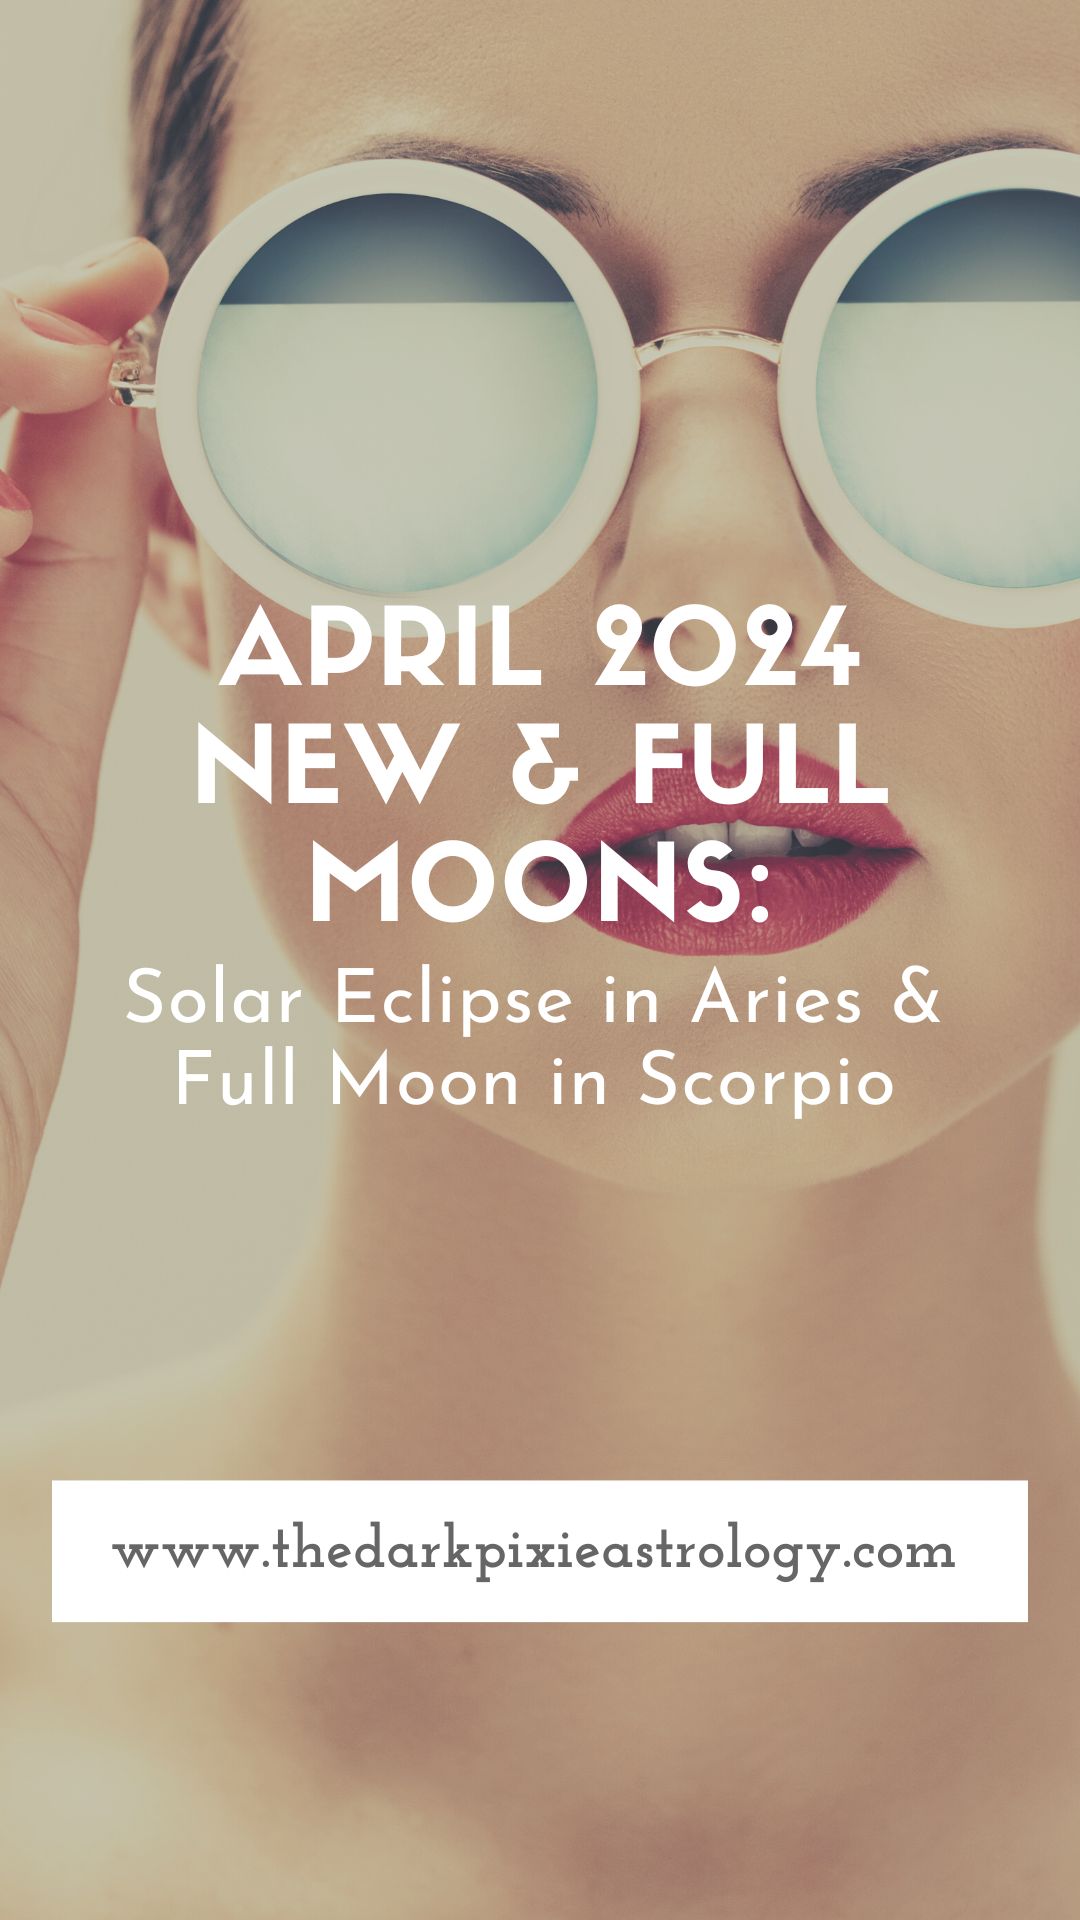 April 2024 New & Full Moons: Solar Eclipse in Aries & Full Moon in Scorpio - The Dark Pixie Astrology